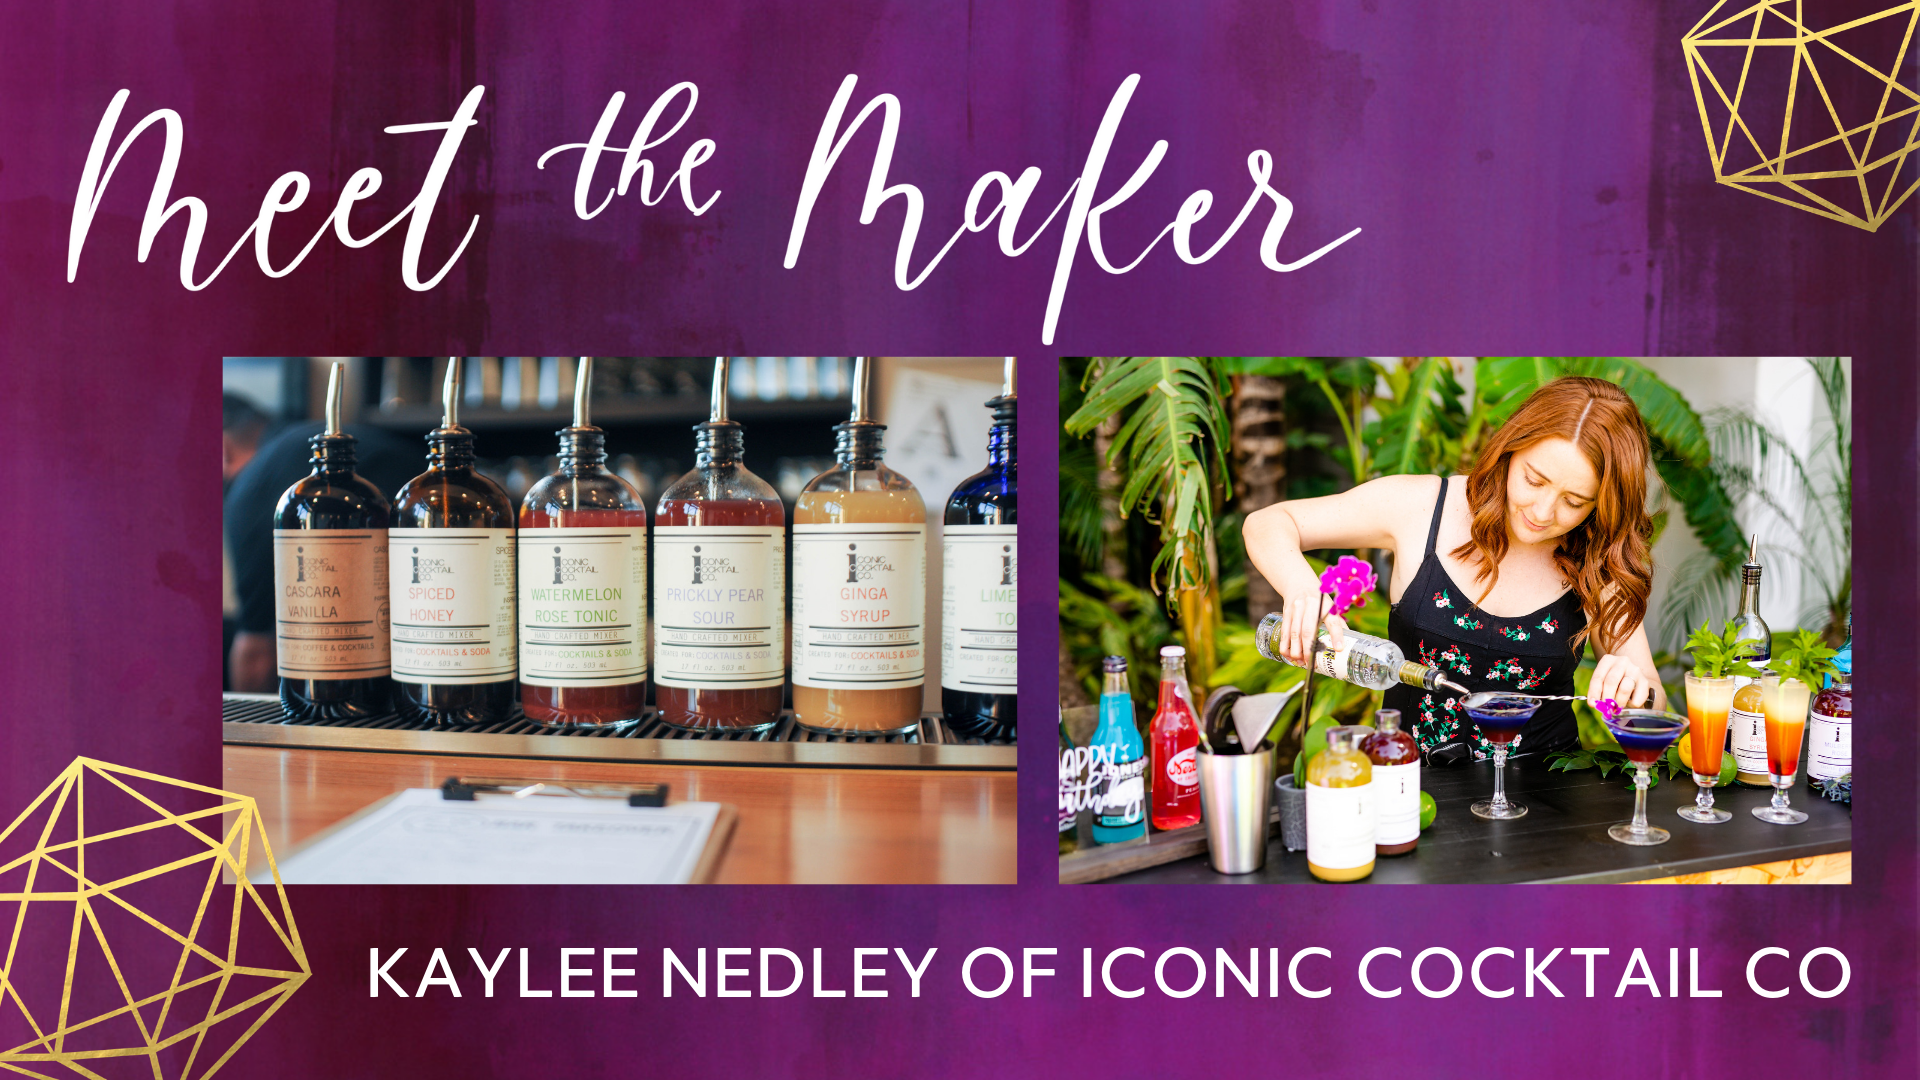 Meet the Maker Iconic Cocktail